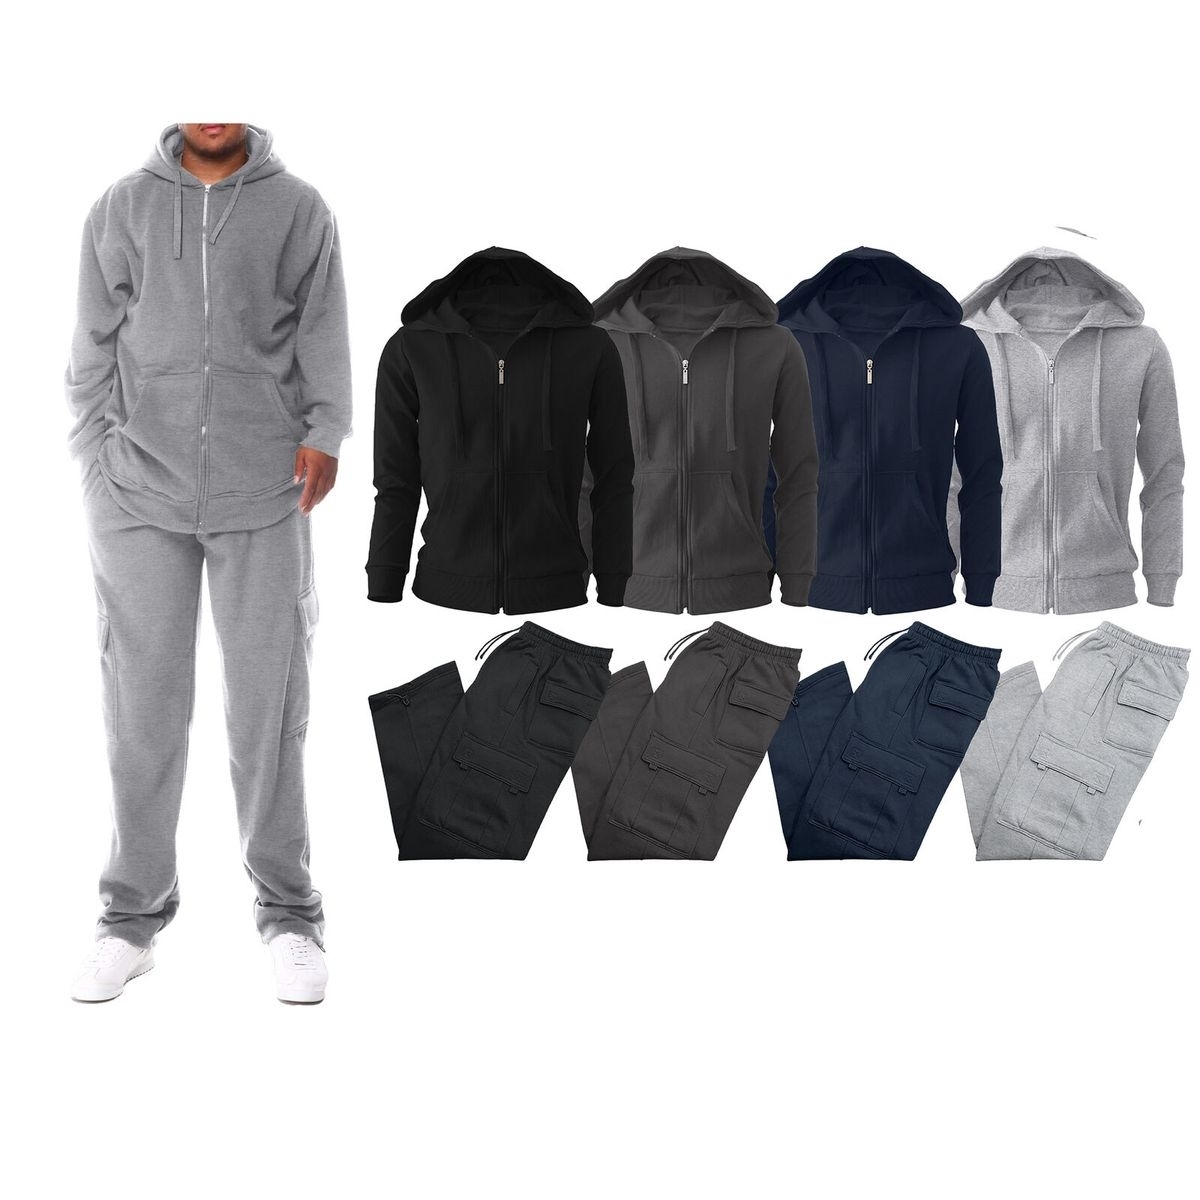 Multi-Pack: Men's Big & Tall Winter Warm Athletic Active Cozy Fleece Lined Multi-Pocket Full Zip Up Cargo Tracksuit - Grey, 2-pack, 3xl